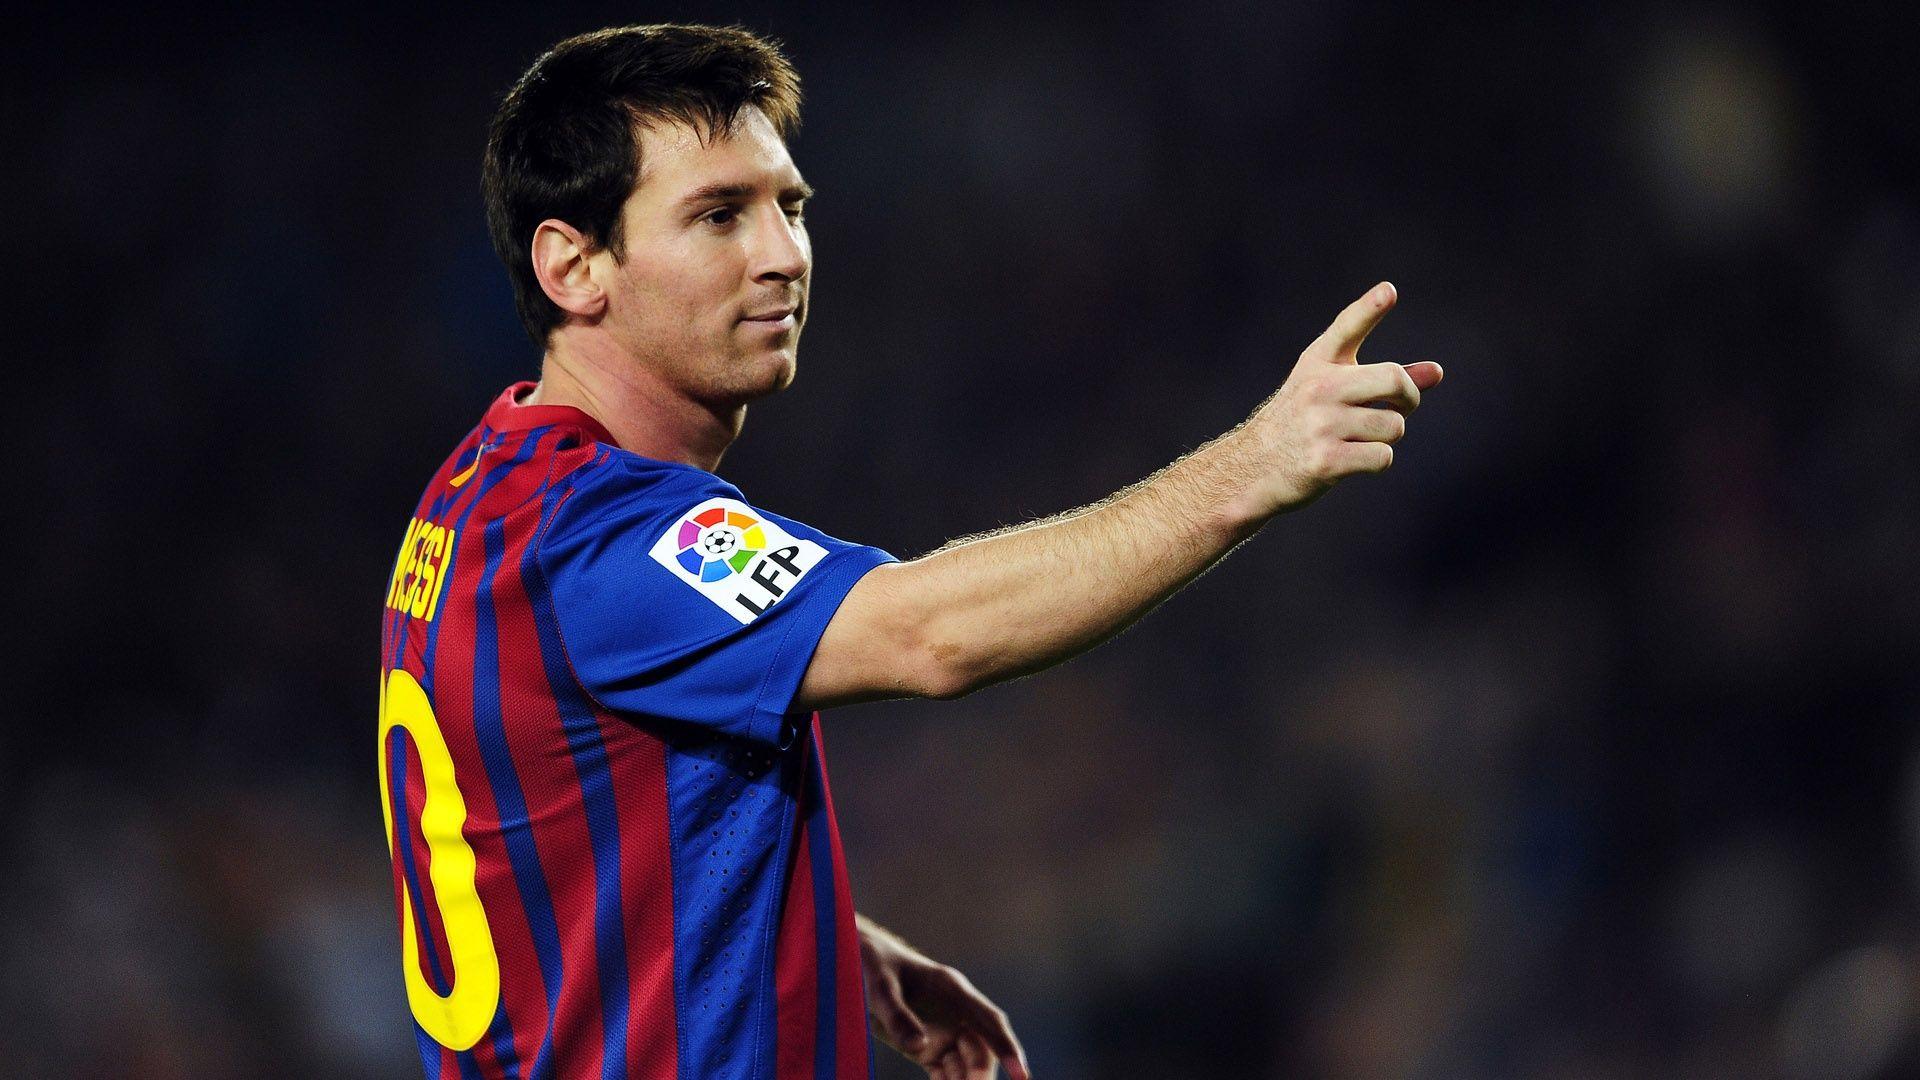 Wallpaper High Resolution Football Lionel Messi HD Full Size With